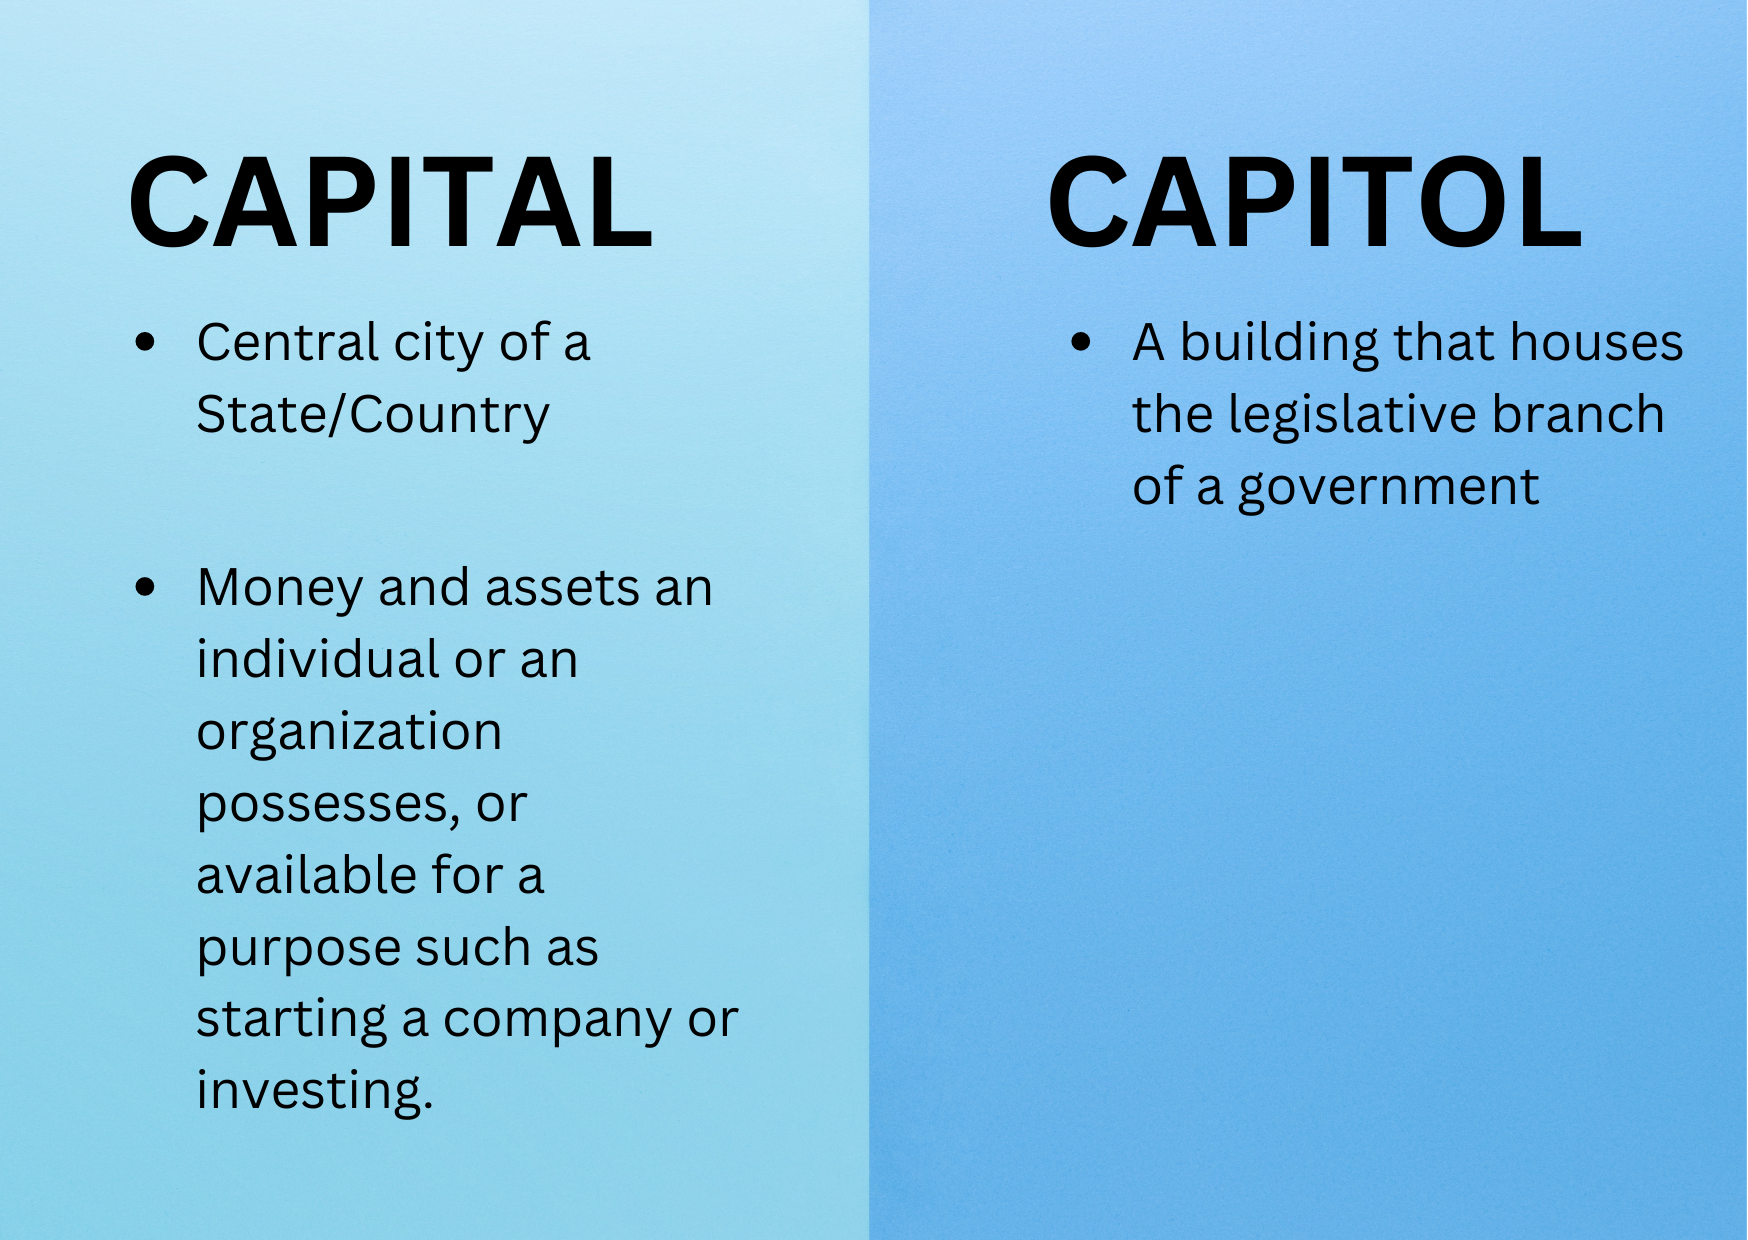 A graph that shows the difference between the Capital or Capitol. Capital is a central city of a state/country or money/assets of an individual or an organisation, or available for a purpose of starting a company or investing. Capitol refers to the building that houses the legislative branch of a government